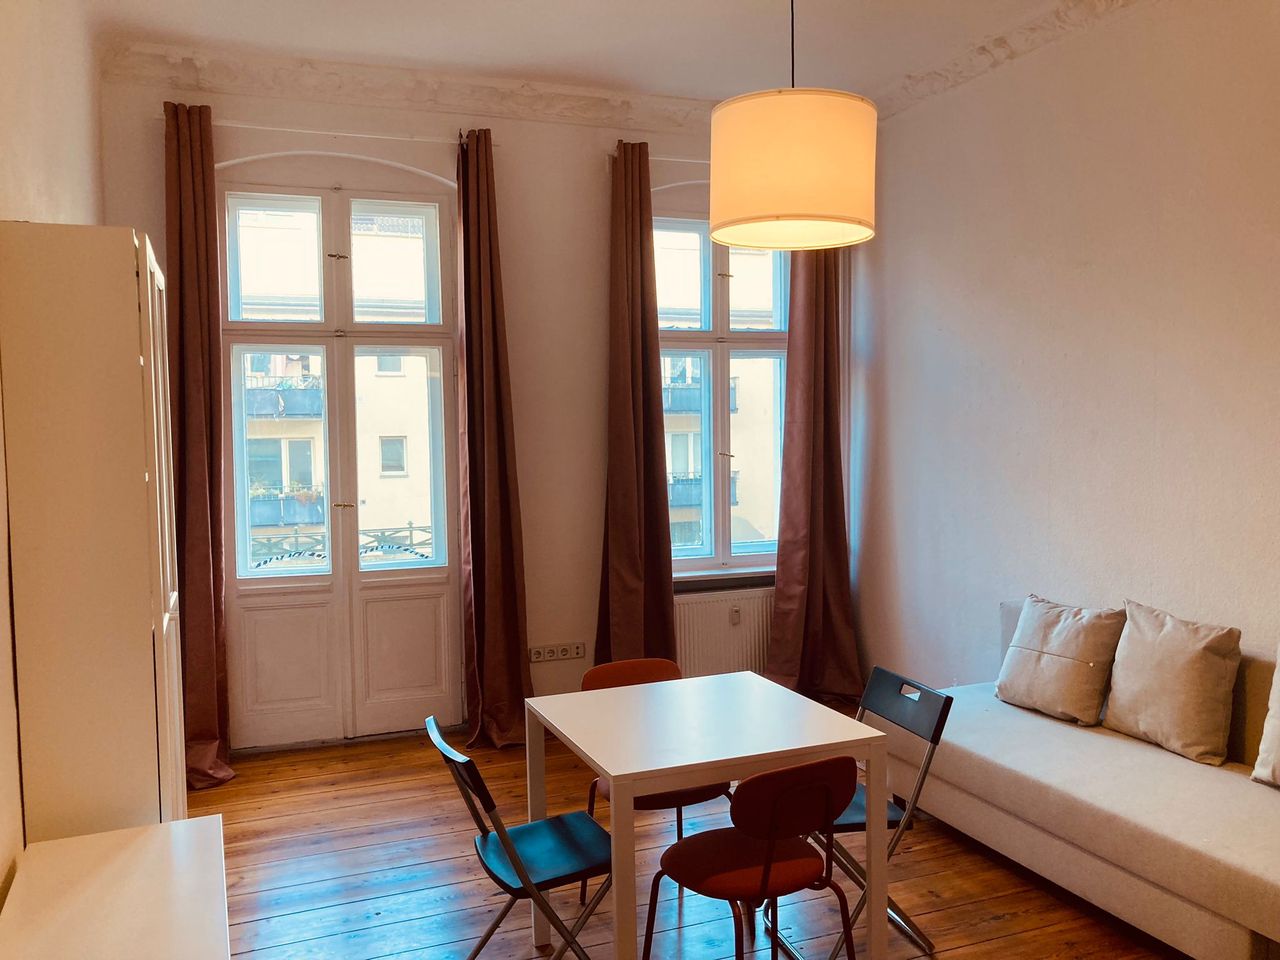 Lonterm rent 1- 2 years furnished in Moabit with balcony